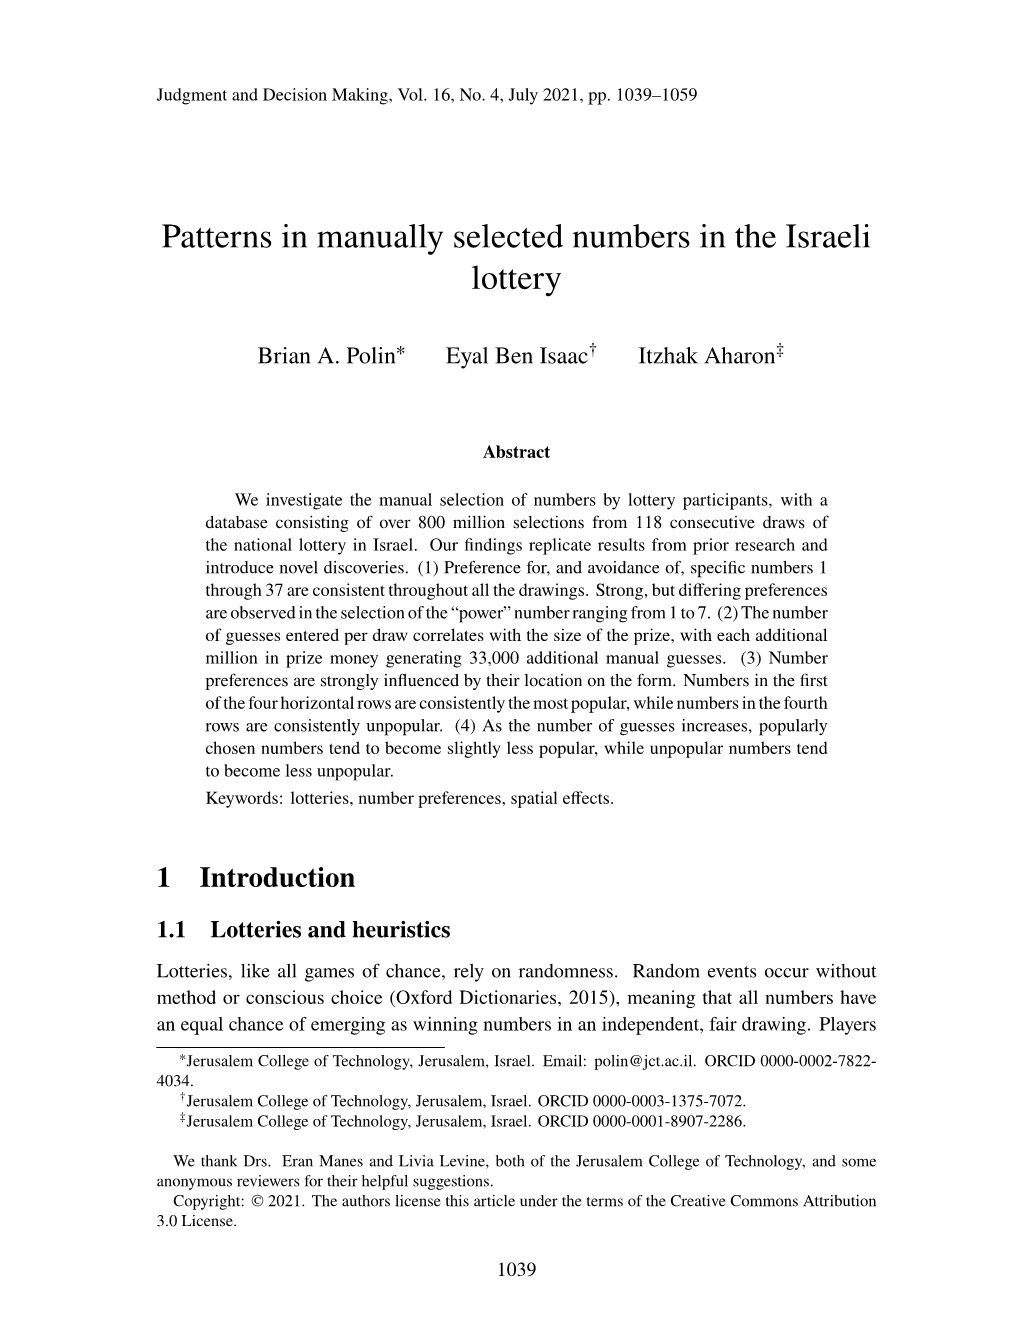 Patterns in Manually Selected Numbers in the Israeli Lottery